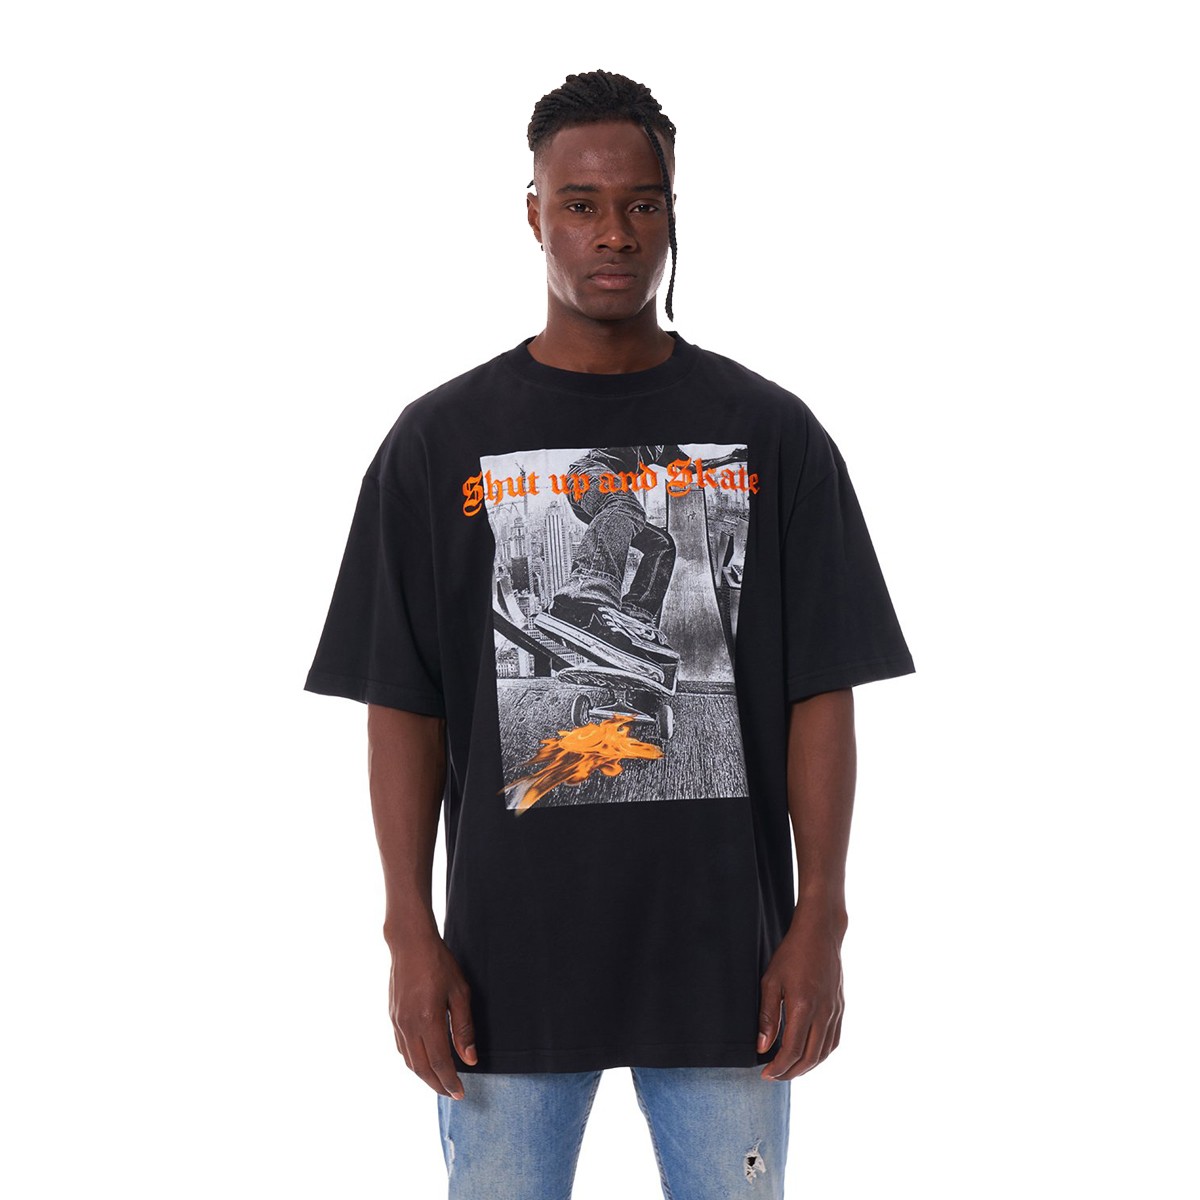 Ghetto Off Limits Shut Up And Skate Black Oversize T-Shirt TS-20003